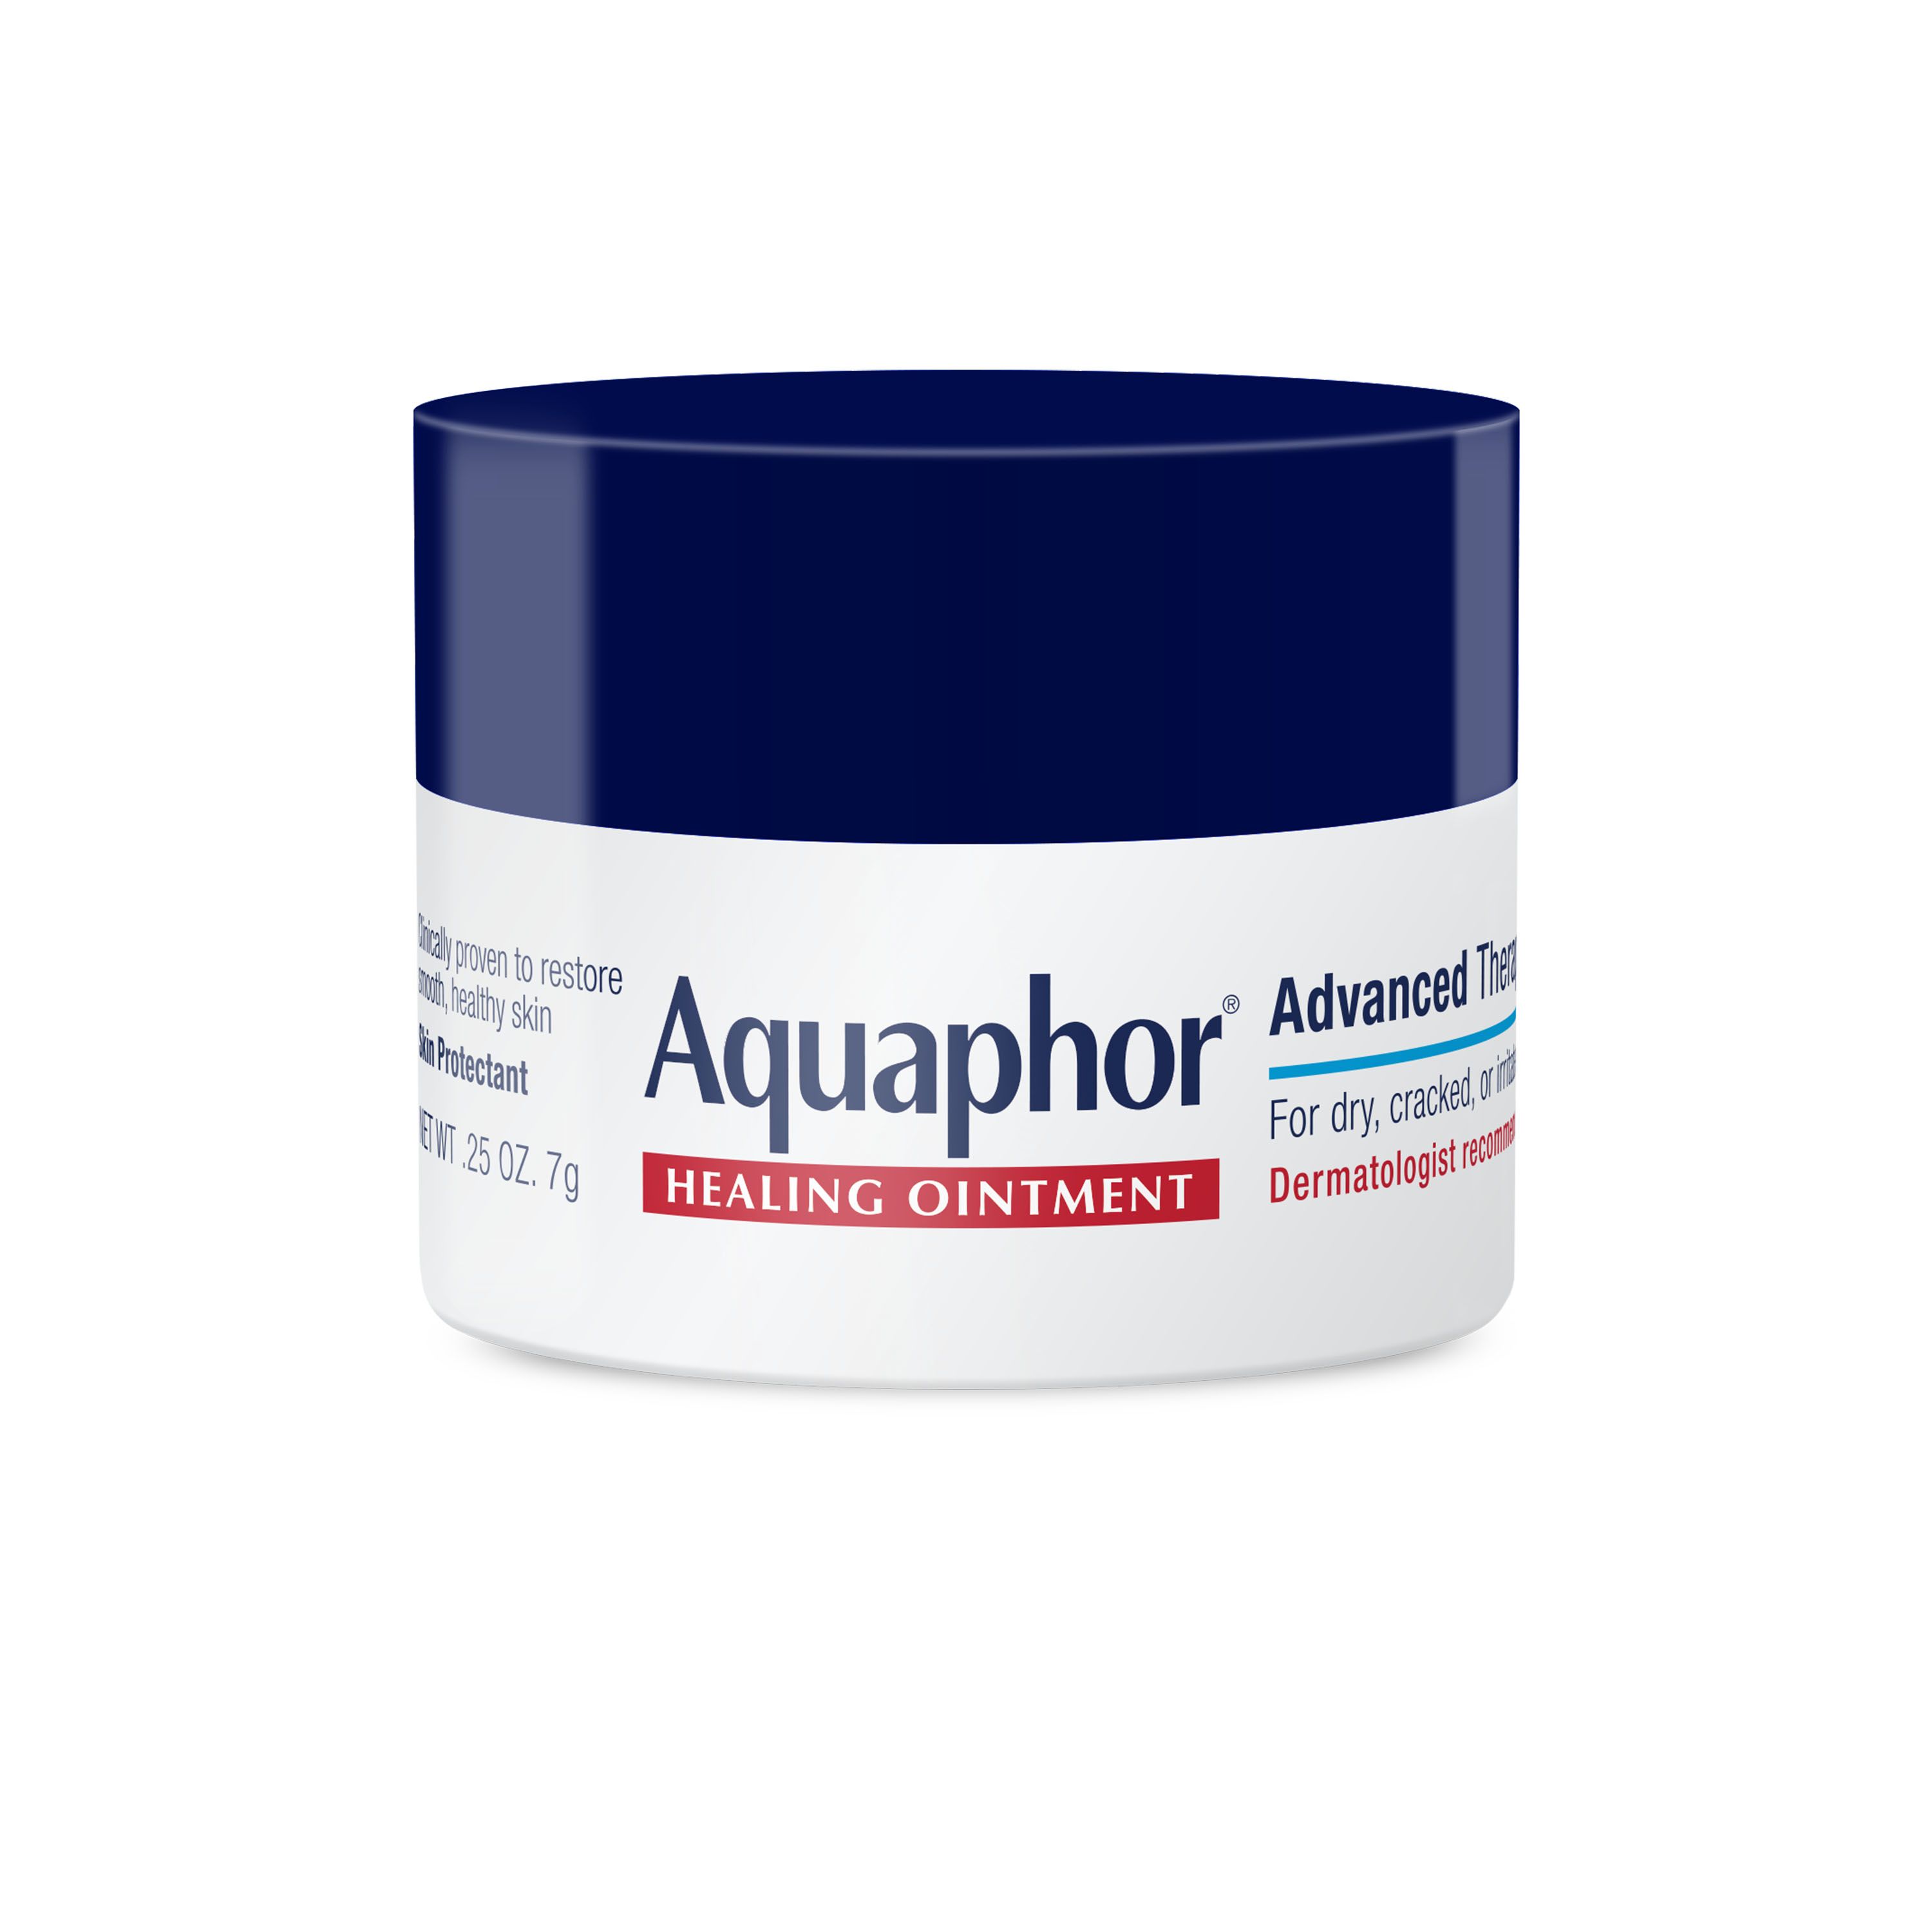 Aquaphor Healing Ointment Advanced Therapy Skin Protectant - .25 oz